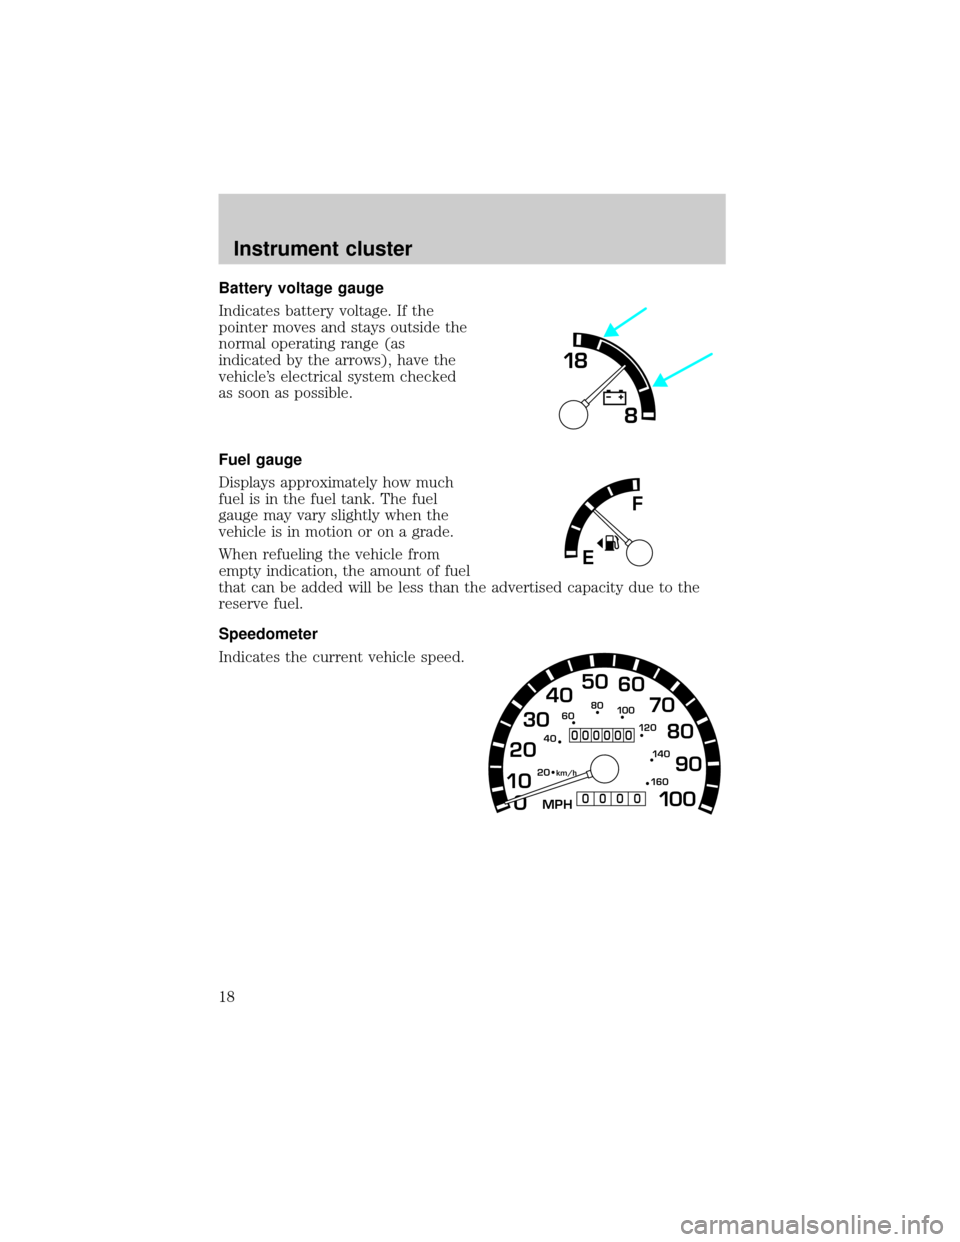 FORD E SERIES 2002 4.G User Guide Battery voltage gauge
Indicates battery voltage. If the
pointer moves and stays outside the
normal operating range (as
indicated by the arrows), have the
vehicles electrical system checked
as soon as